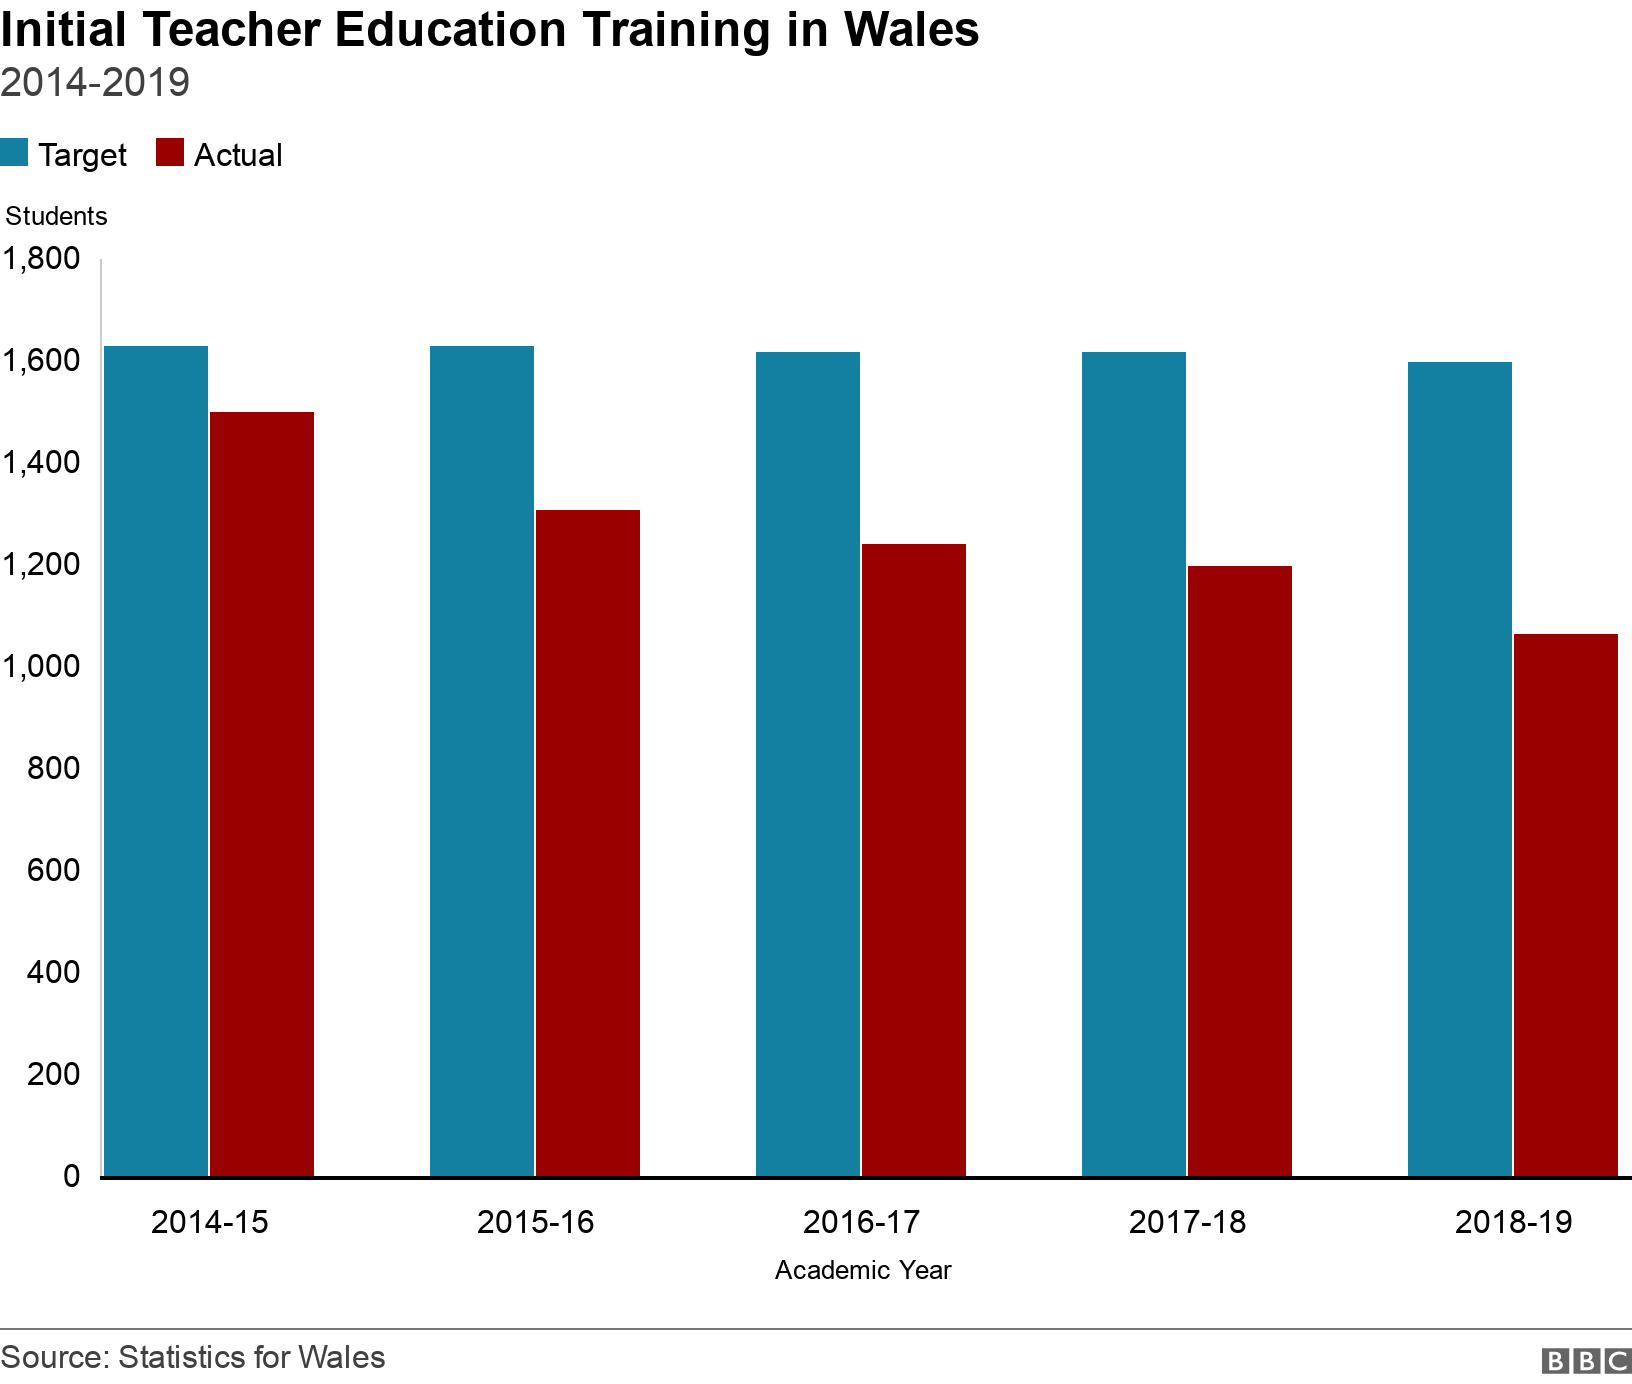 Initial Teacher Education Training  in Wales. 2014-2019. Initial Teacher Education Training in Wales targets and actual entrants from 2014 to 2019 .